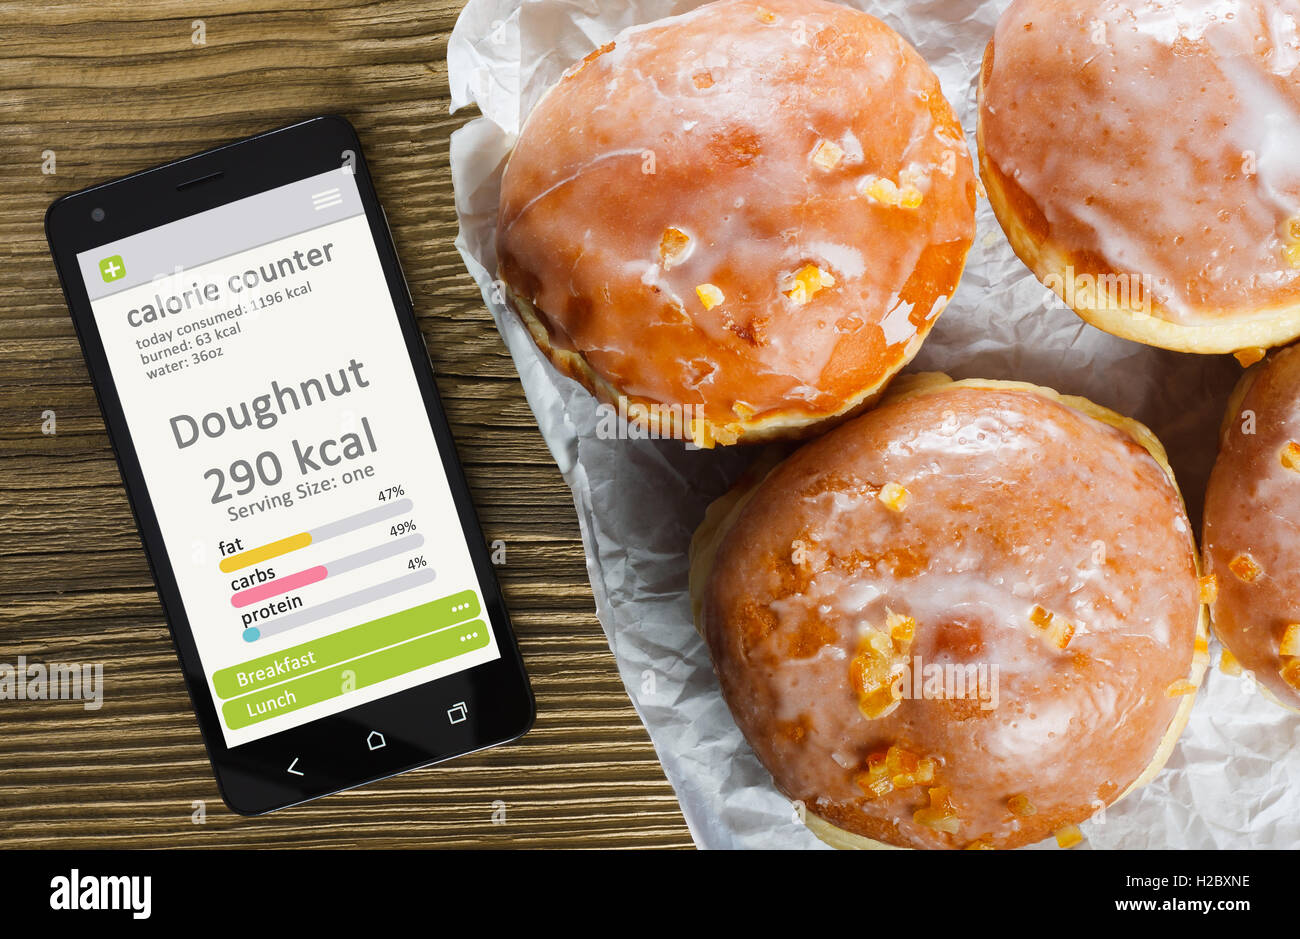 Calorie counter concept - mobile phone with calorie counter app on the screen and doughnuts. Wooden table as background Stock Photo